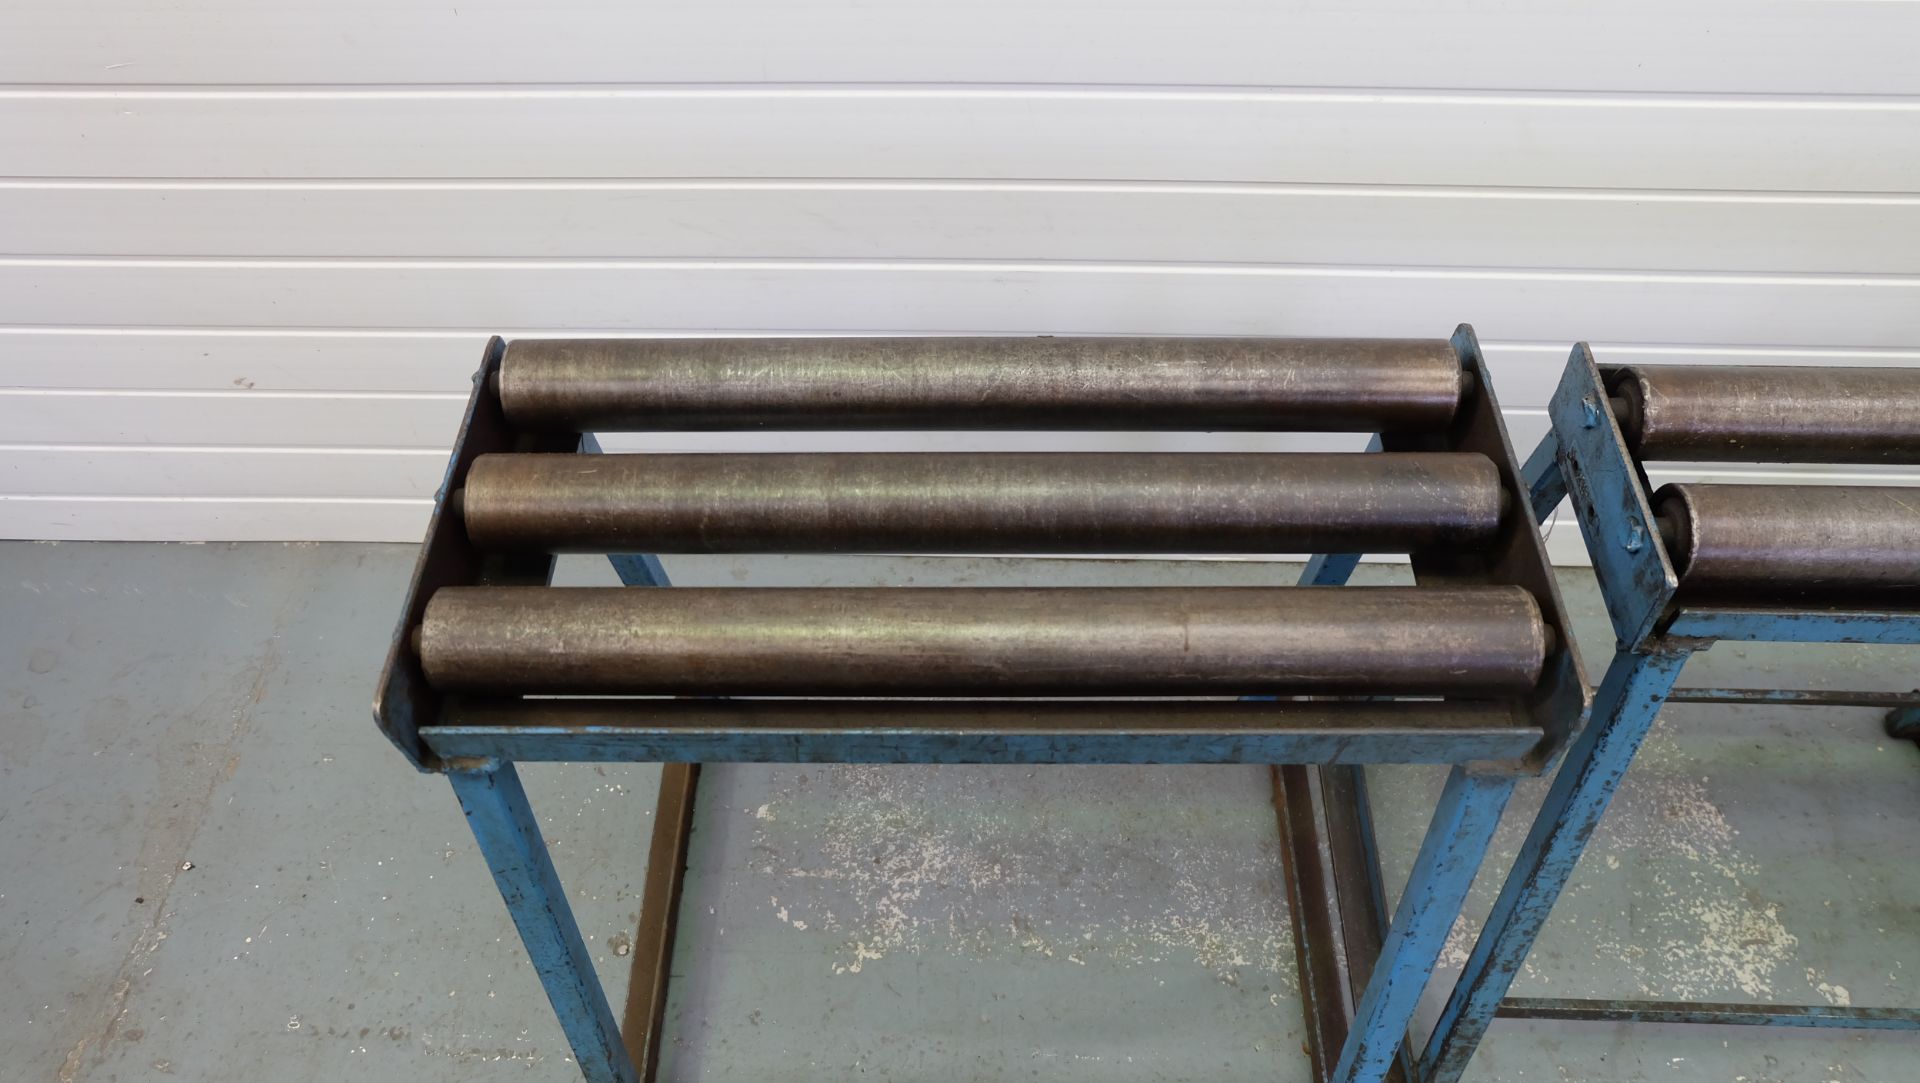 Three Roller Stands. Width of Rollers: 24". Height of Rollers: 28 3/4". - Bild 3 aus 6